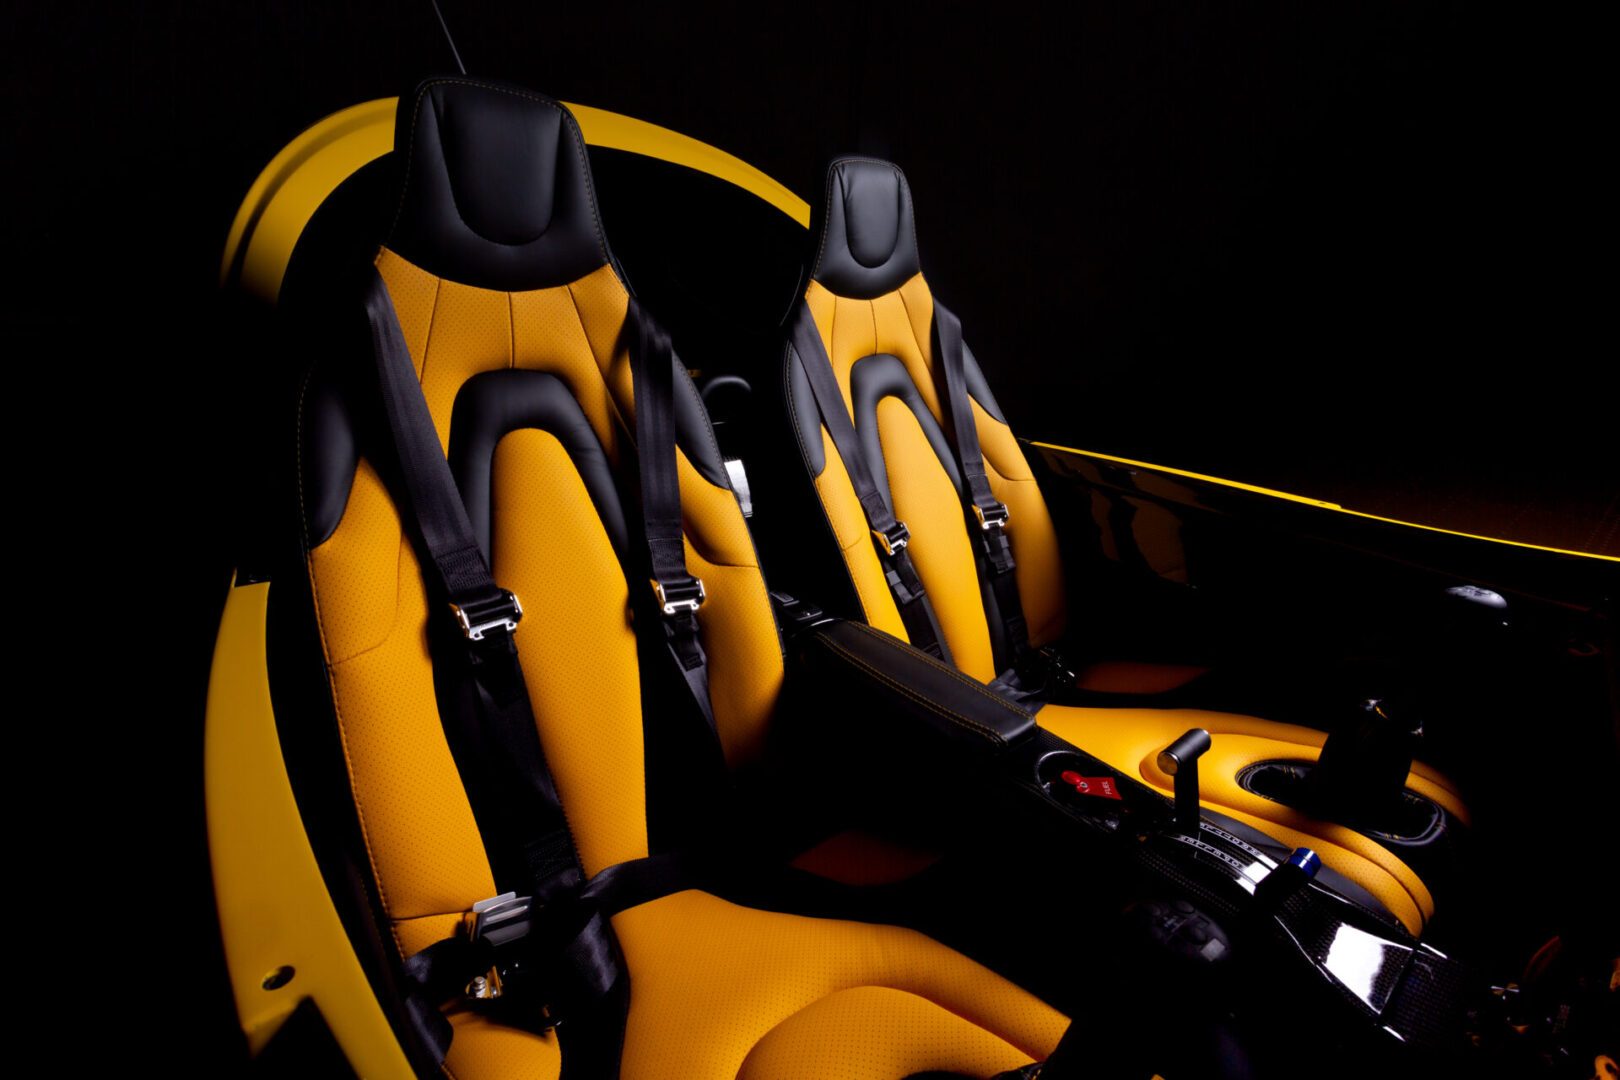 A yellow and black seat in an airplane.